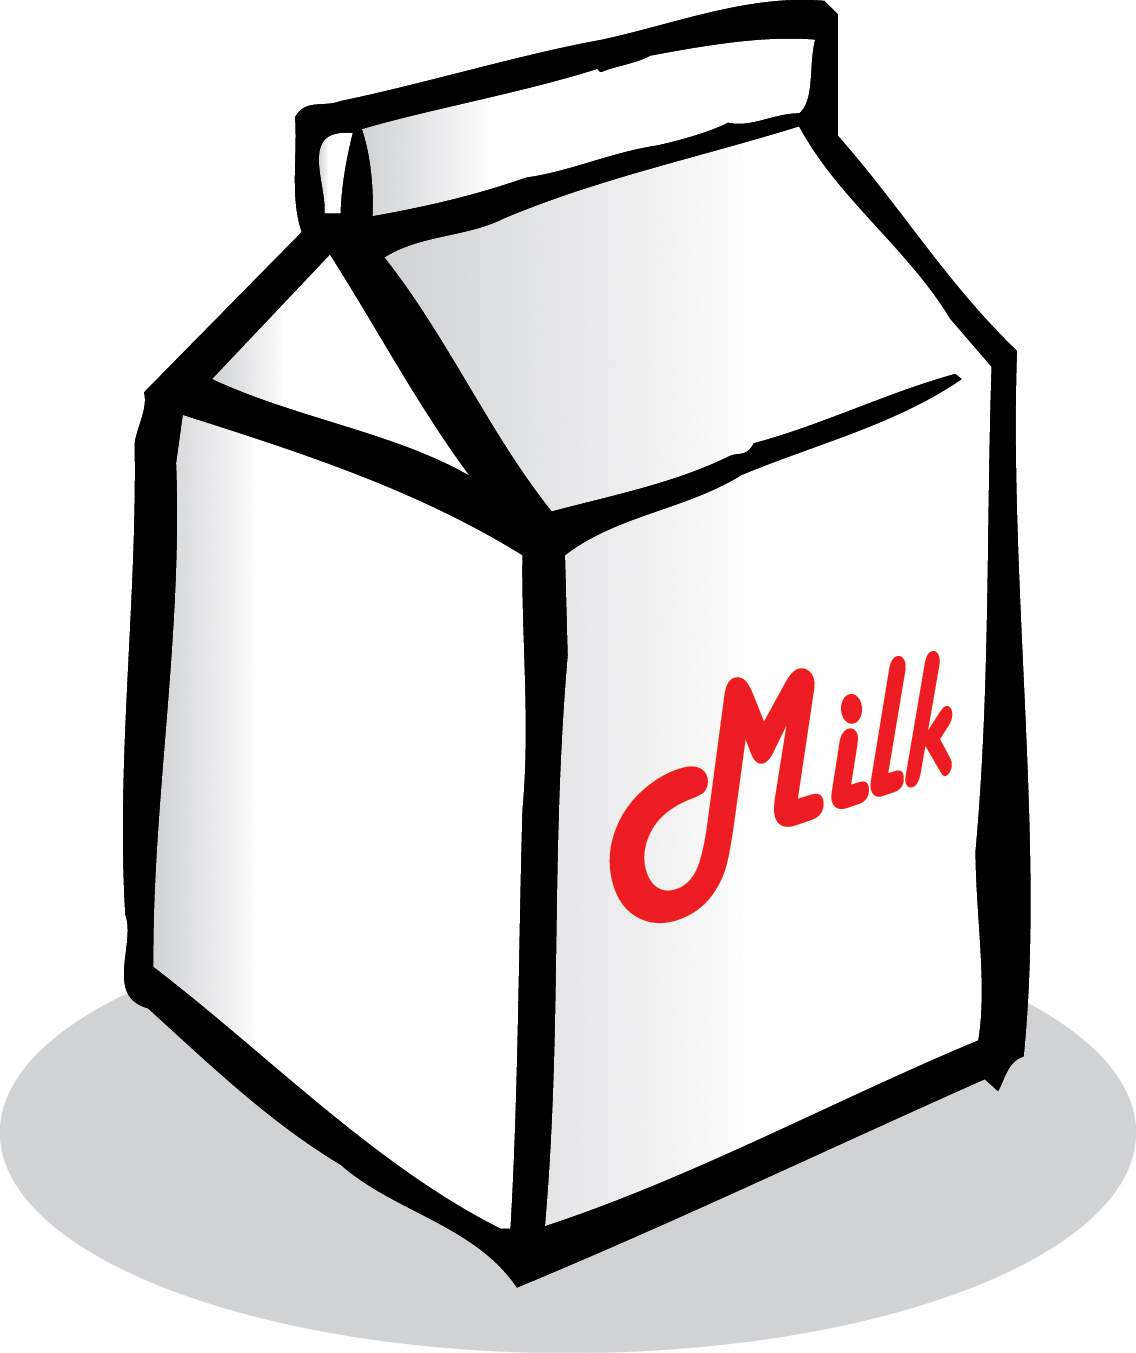 Smallntainer of milk cliparting. Dairy clipart kid